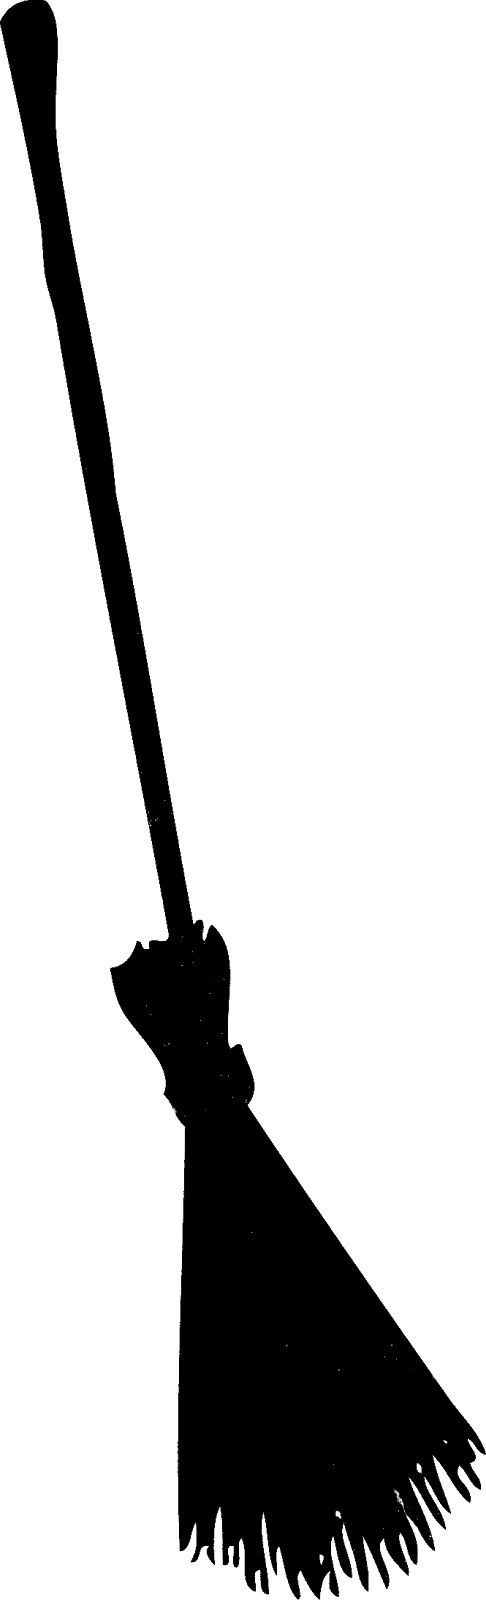 Witches broom silhouette clipart 